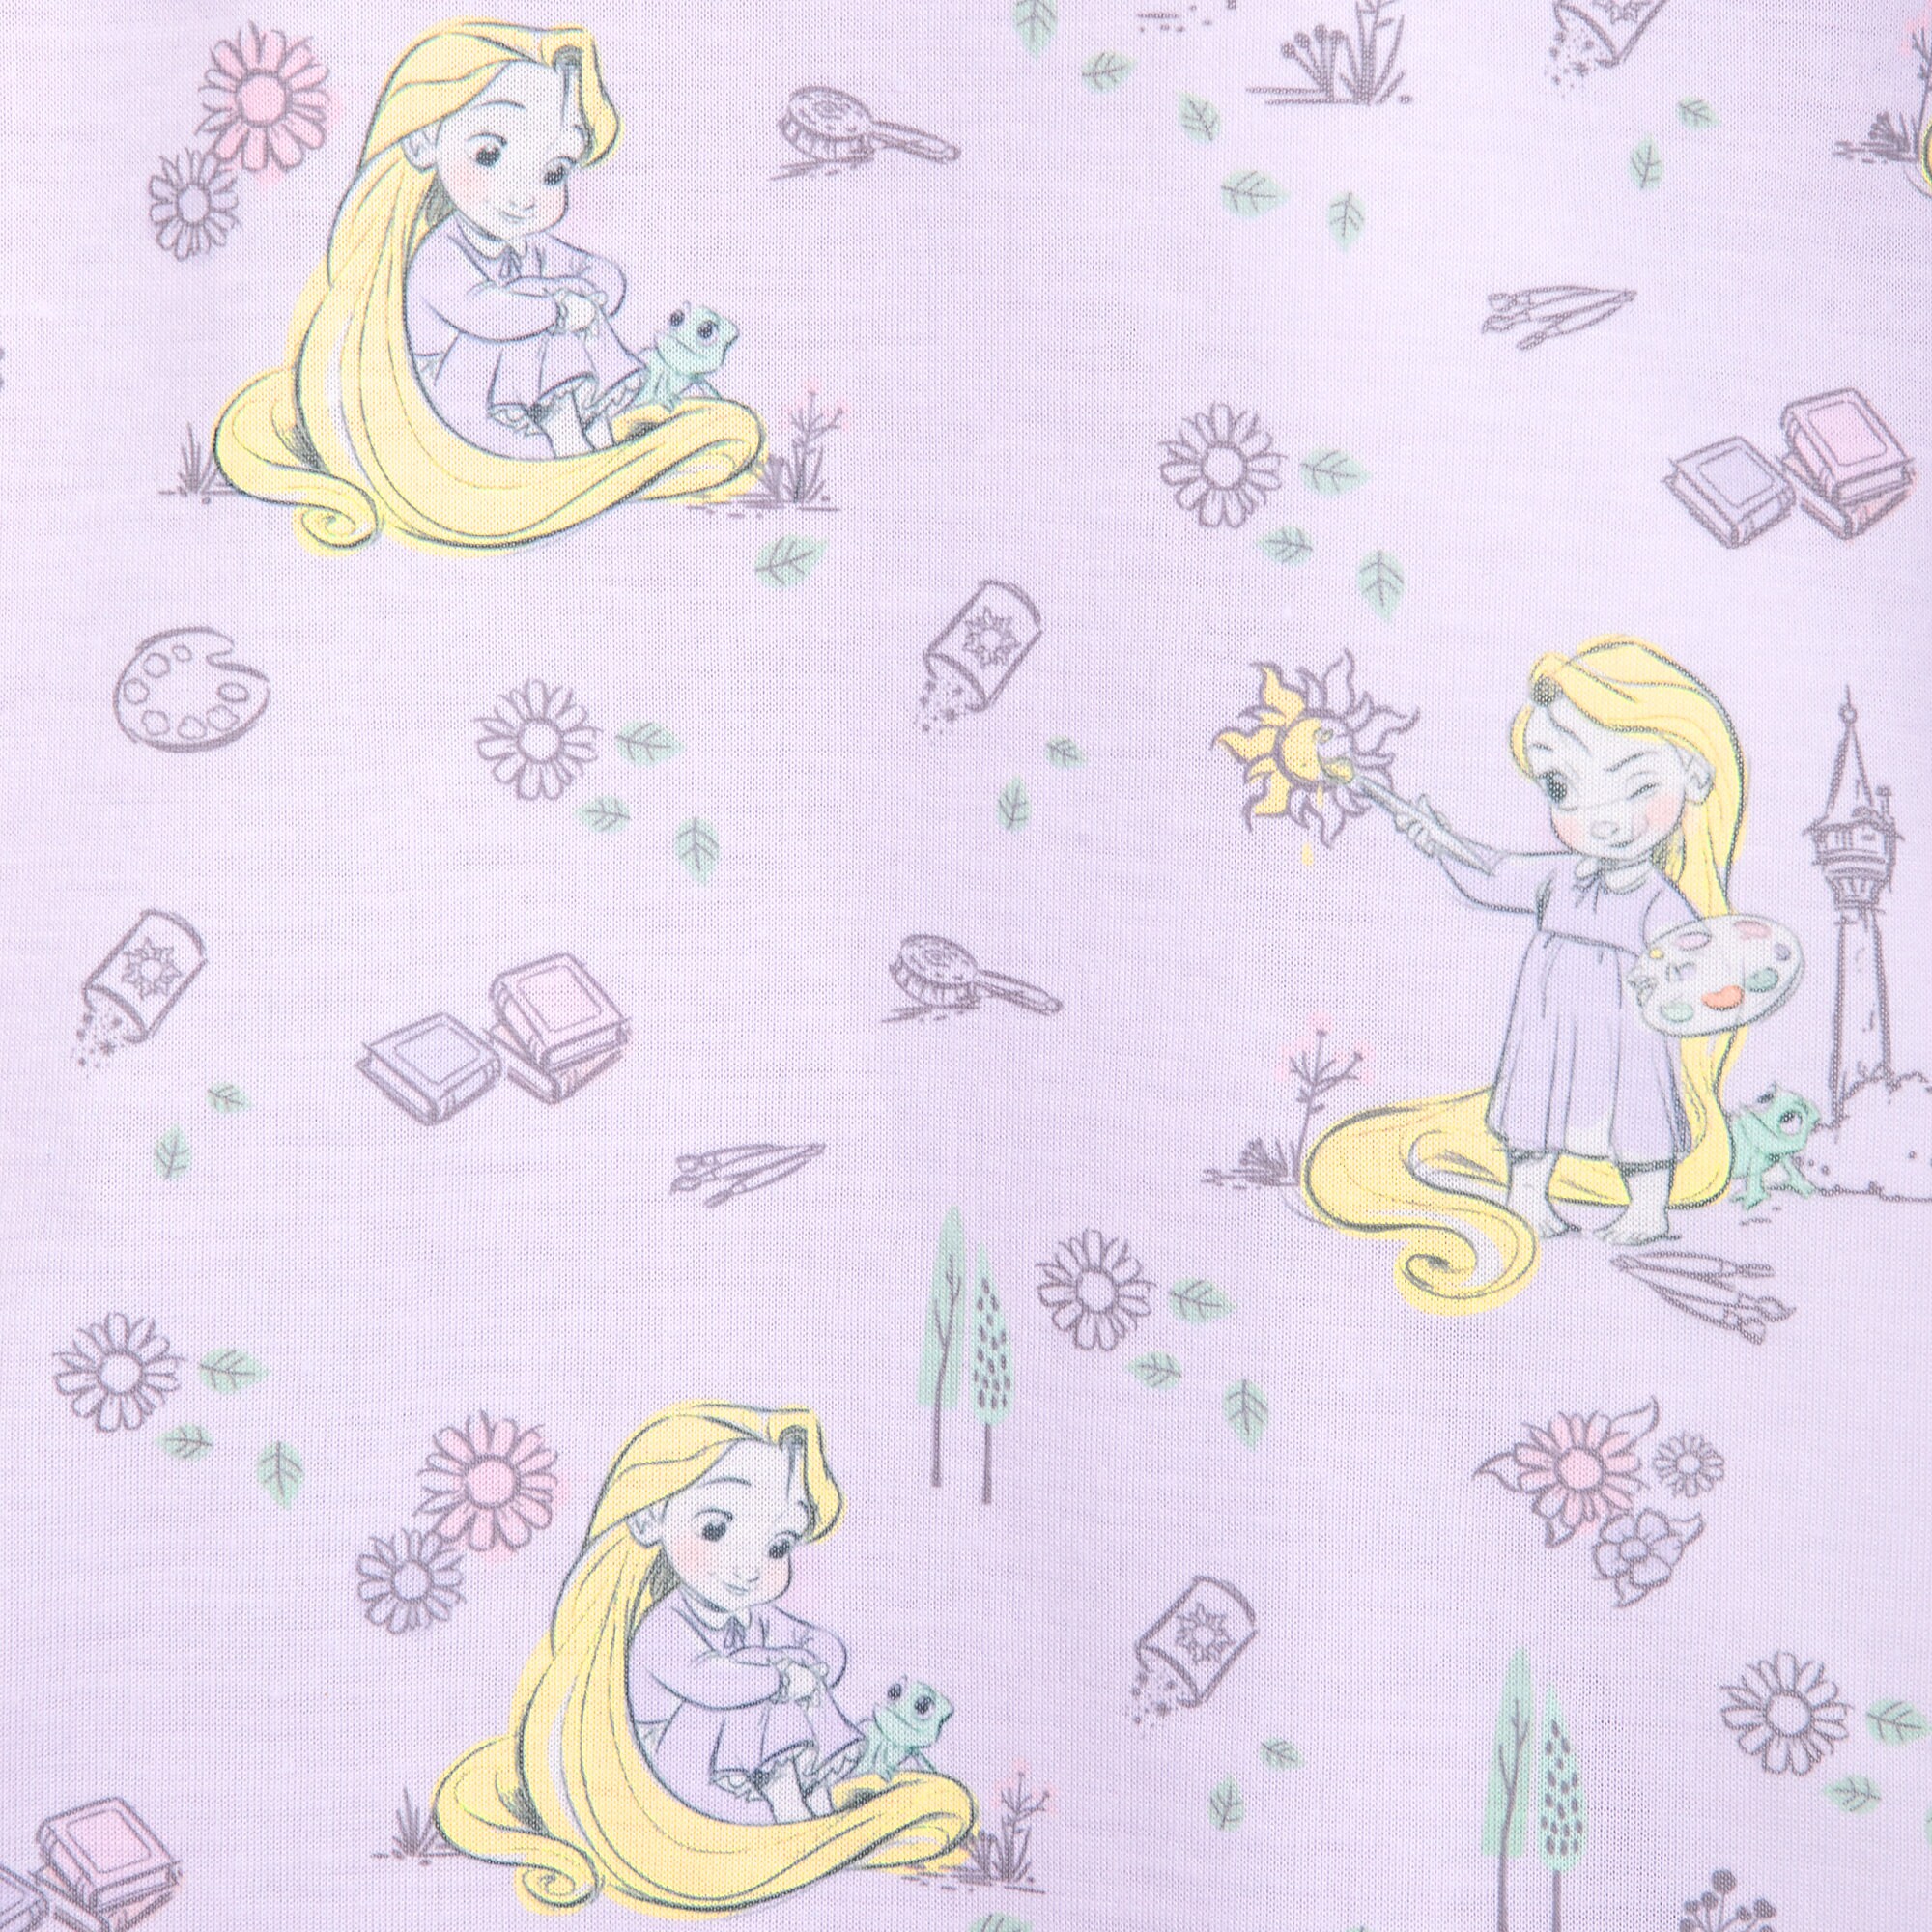 Disney Animators' Collection Rapunzel Sleep Gown Set for Kids and Doll